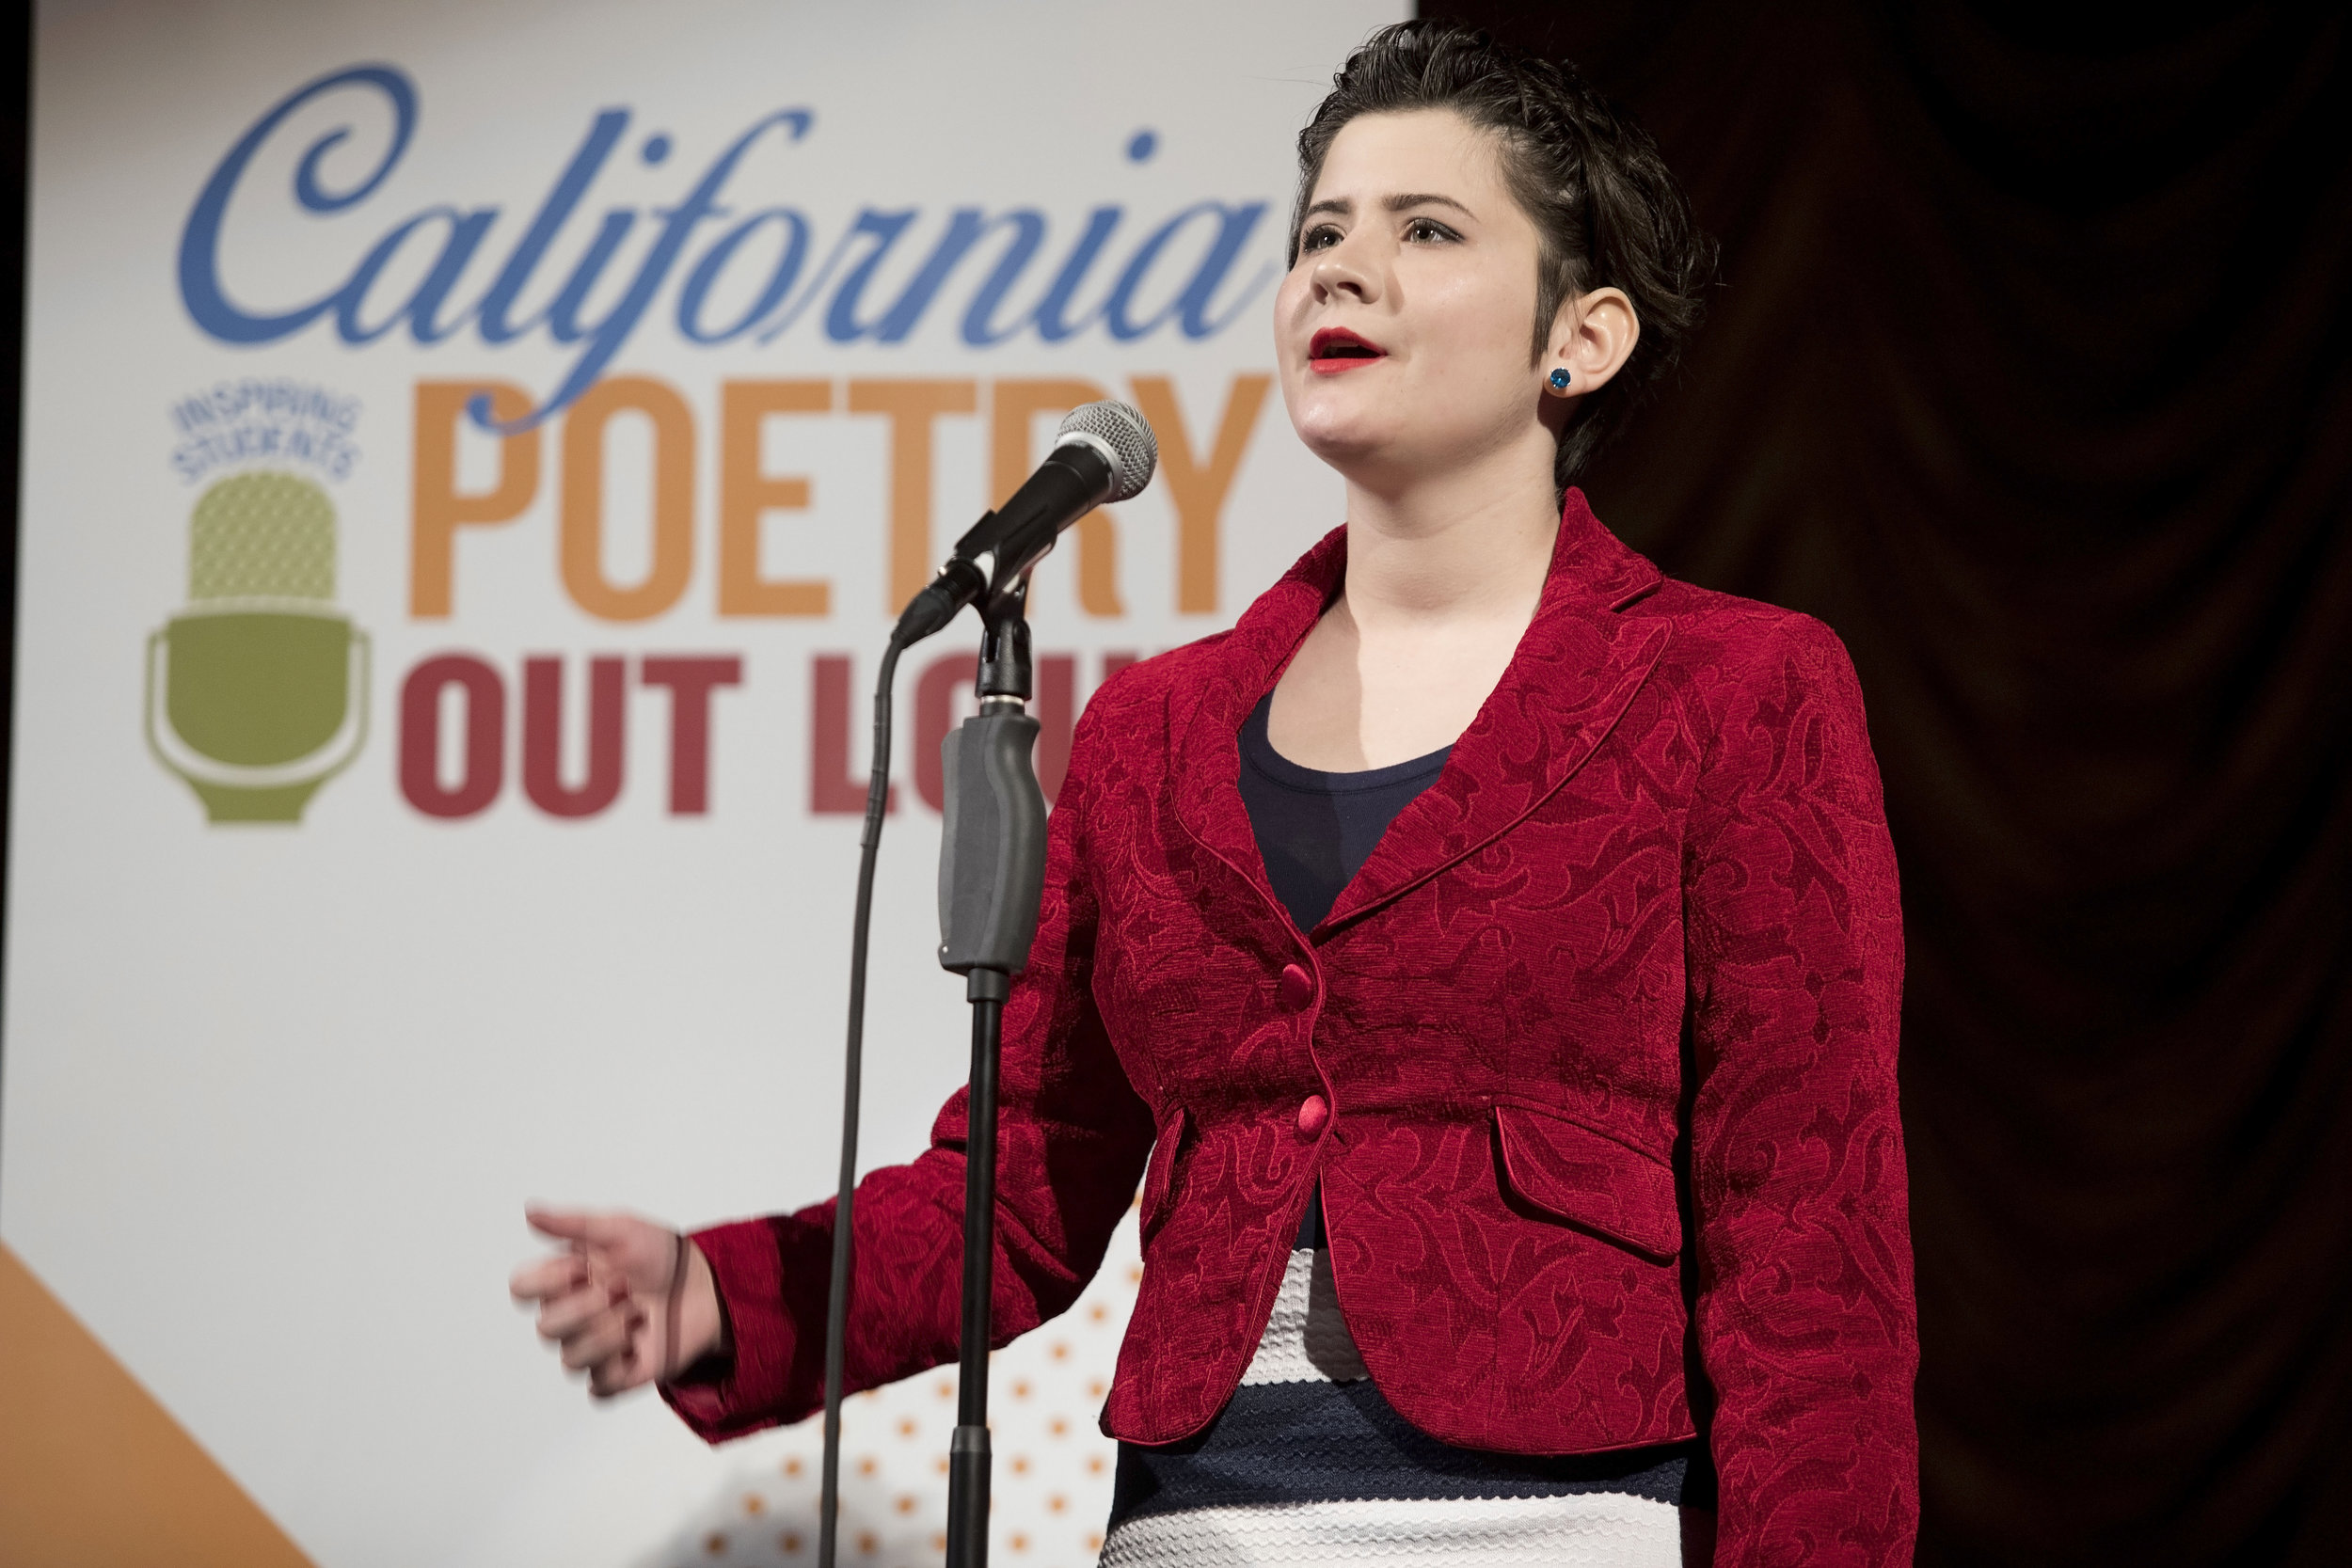 2017 California Poetry Out Loud State Finals